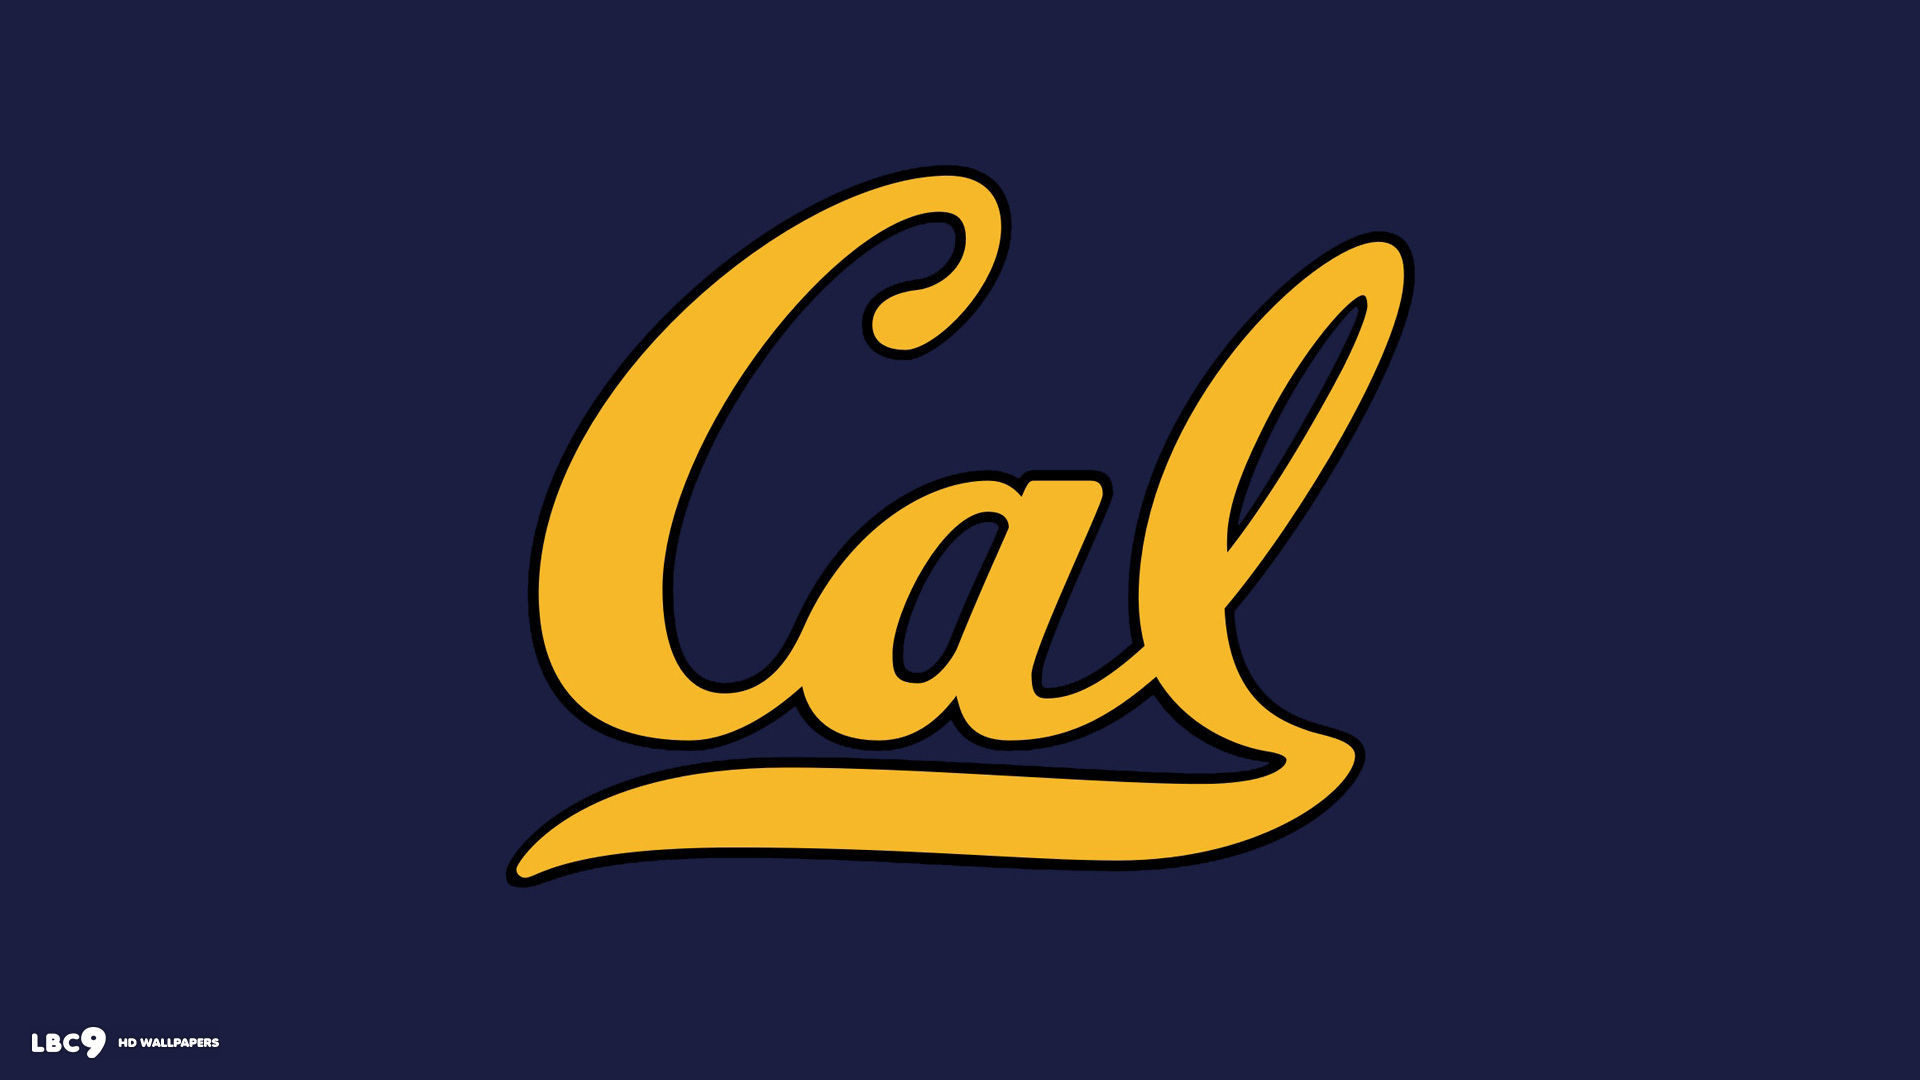 1920x1080 Cal Golden Bears Wallpapers Price Compare 1024Ã576 California Golden Bears  Wallpapers (25 Wallpapers) | Adorable Wallpapers | Wallpapers | Pinterest |  ...